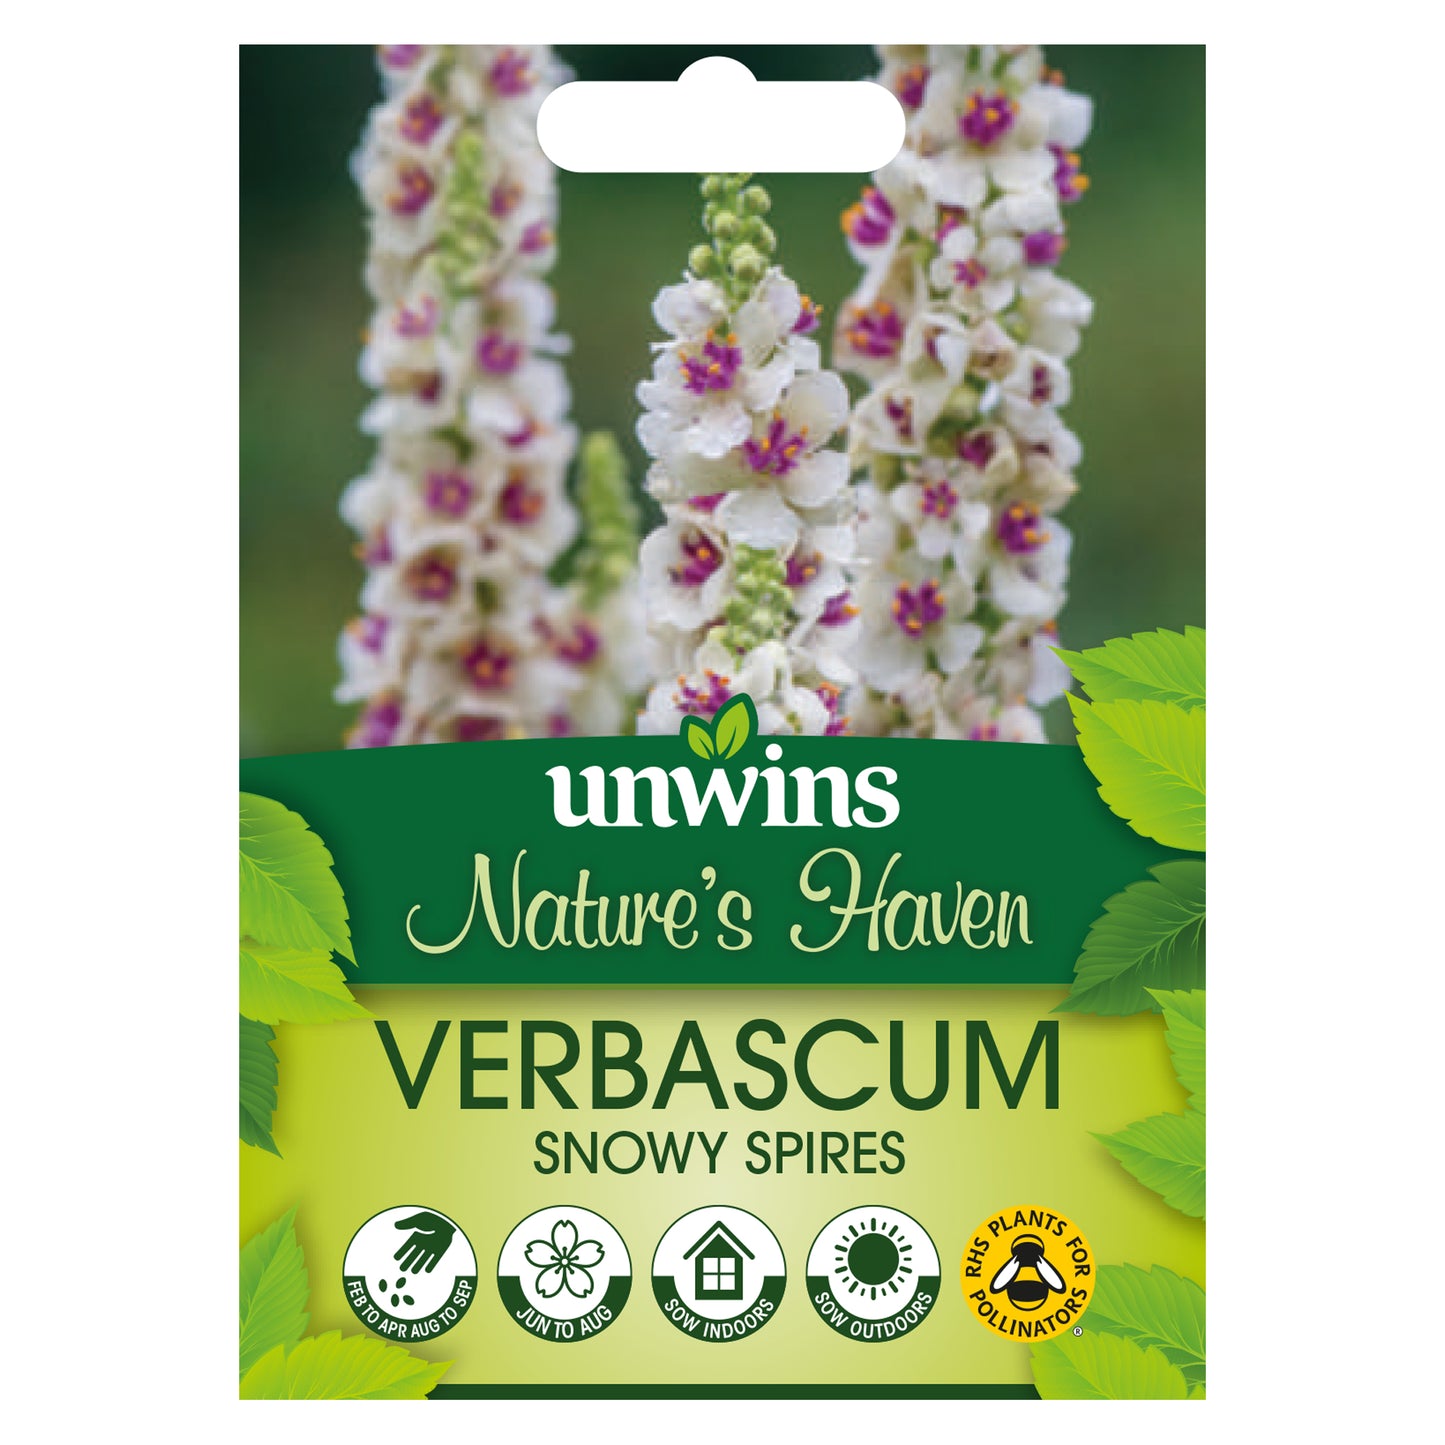 Nature's Haven Verbascum Snowy Spires Seeds front of pack